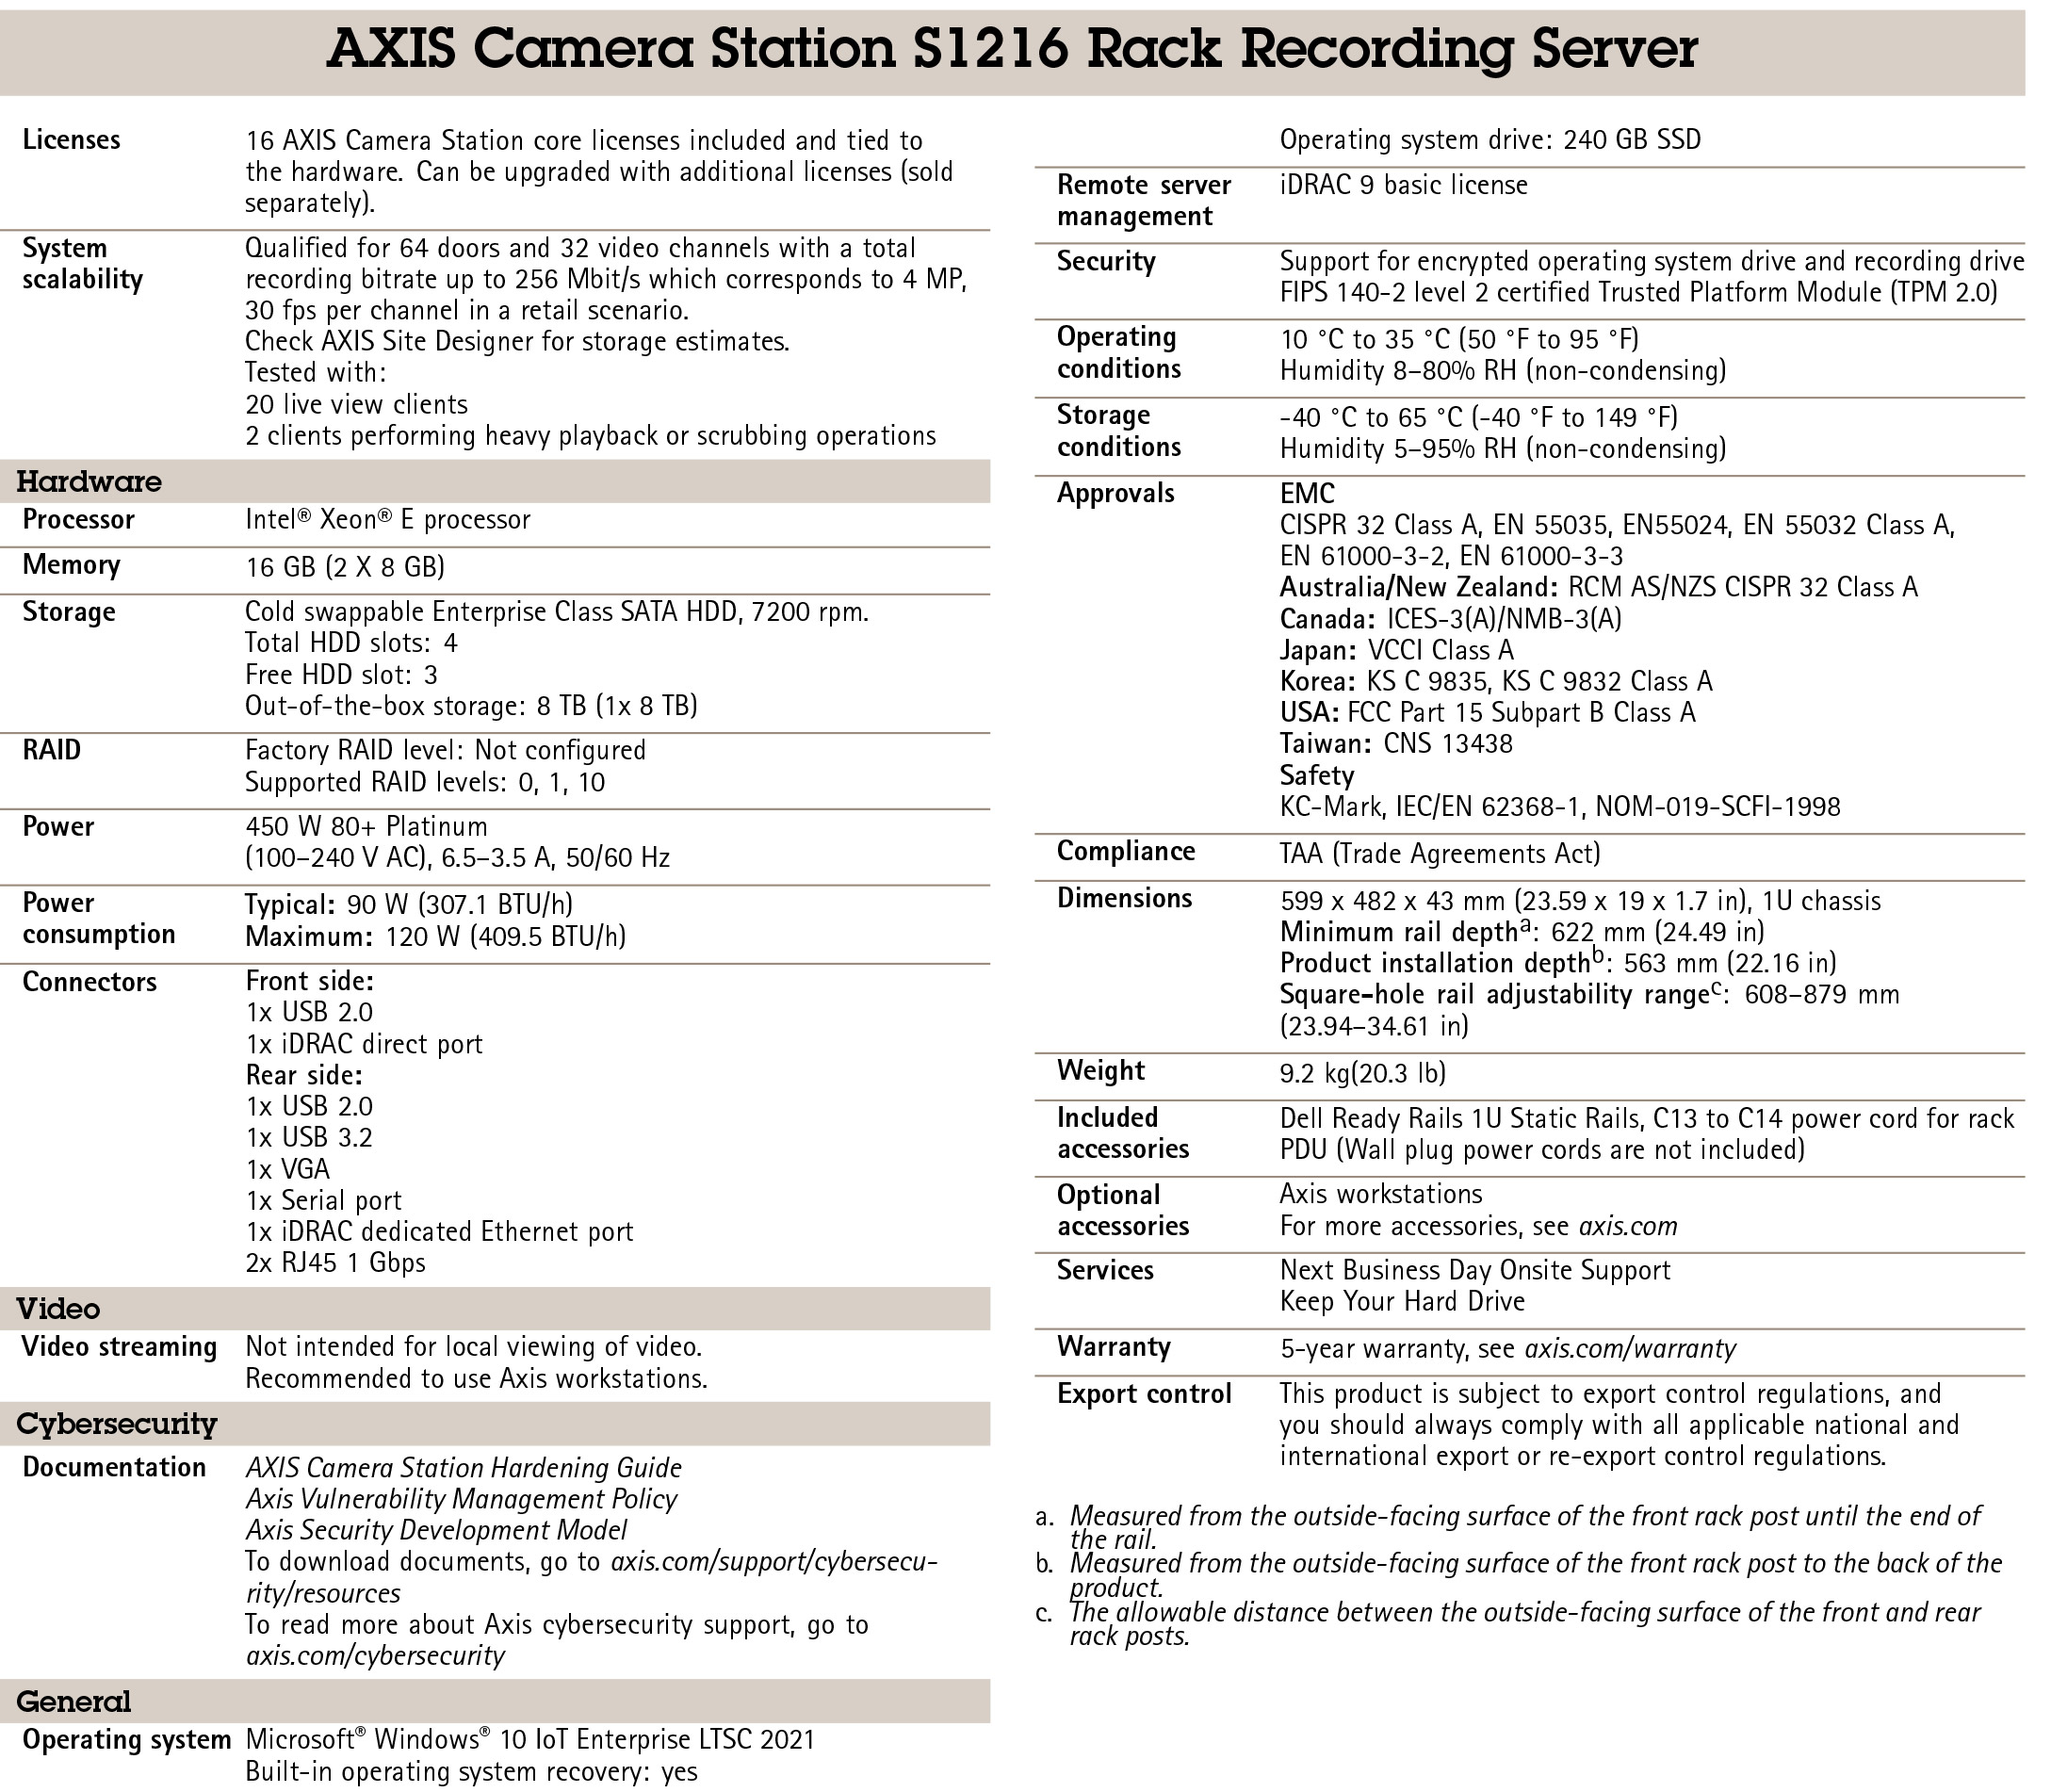 AXIS Camera Station S1216 Rack Recording Server